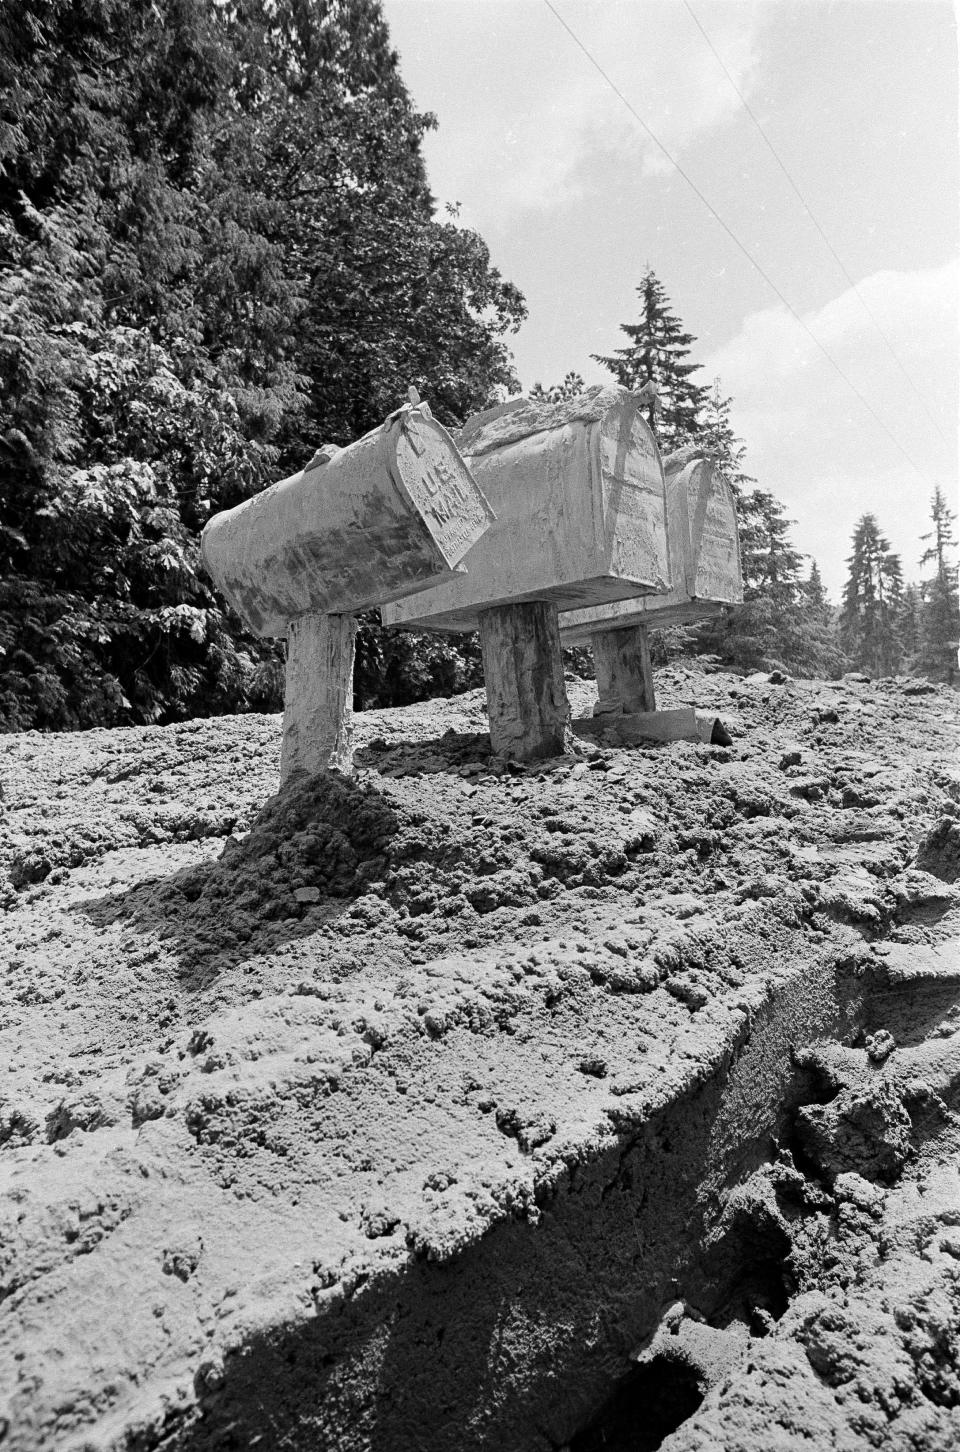 Mud from the Toutle River rises about four feet in this area of Toutle as residents started digging out, May 31, 1980, after the area was hit by flash flooding in the wake of the May 18 eruptions on Mount St. Helens.